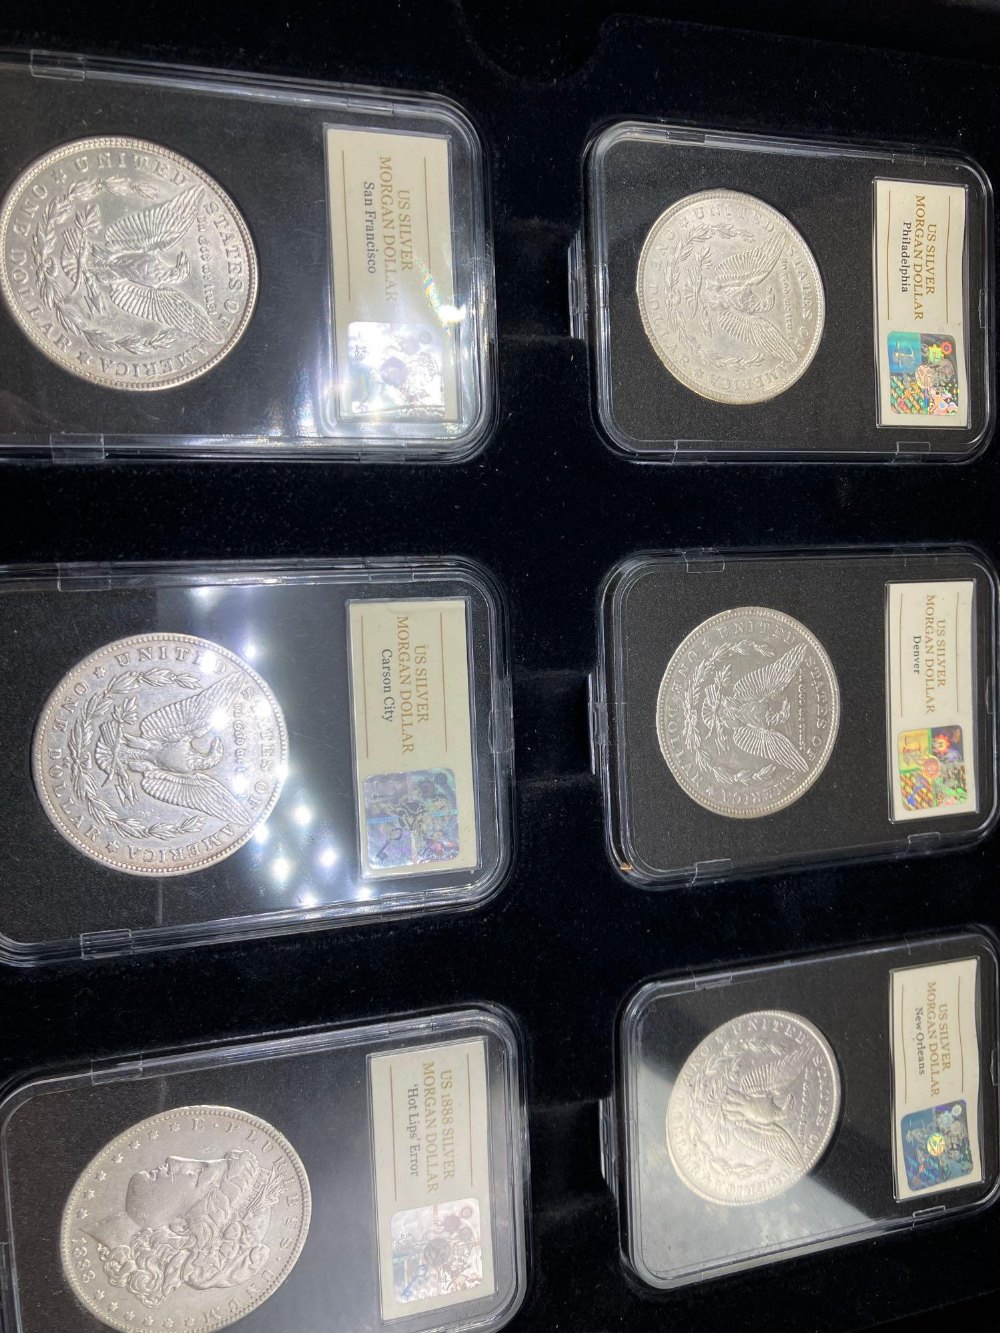 A USA Morgan dollar mint mark collection with CC Carson City and Hot Lips Error - Image 2 of 2